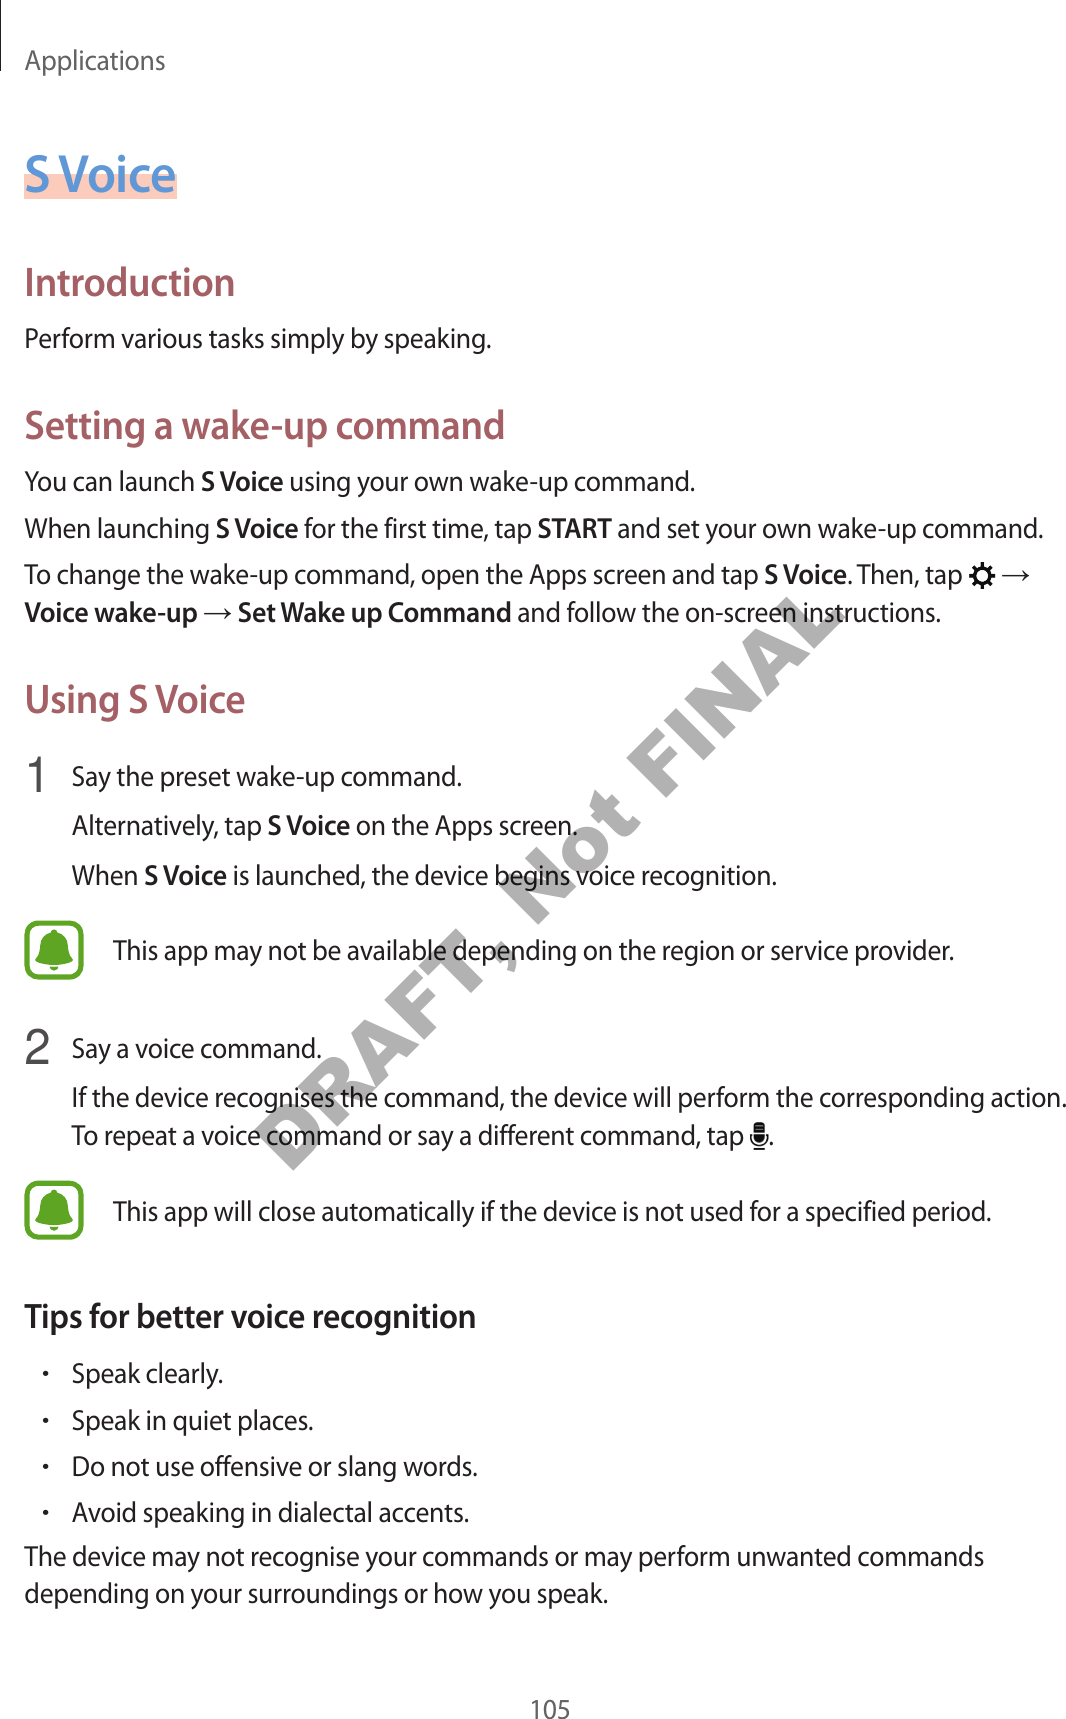 Applications105S VoiceIntroductionPerform various tasks simply by speaking.Setting a wake-up commandYou can launch S Voice using your own wake-up command.When launching S Voice for the first time, tap START and set your own wake-up command.To change the wake-up command, open the Apps screen and tap S Voice. Then, tap   → Voice wake-up → Set Wake up Command and follow the on-screen instructions.Using S Voice1  Say the preset wake-up command.Alternatively, tap S Voice on the Apps screen.When S Voice is launched, the device begins voice recognition.This app may not be available depending on the region or service provider.2  Say a voice command.If the device recognises the command, the device will perform the corresponding action. To repeat a voice command or say a different command, tap  .This app will close automatically if the device is not used for a specified period.Tips for better voice recognition•Speak clearly.•Speak in quiet places.•Do not use offensive or slang words.•Avoid speaking in dialectal accents.The device may not recognise your commands or may perform unwanted commands depending on your surroundings or how you speak.DRAFT, Not FINAL